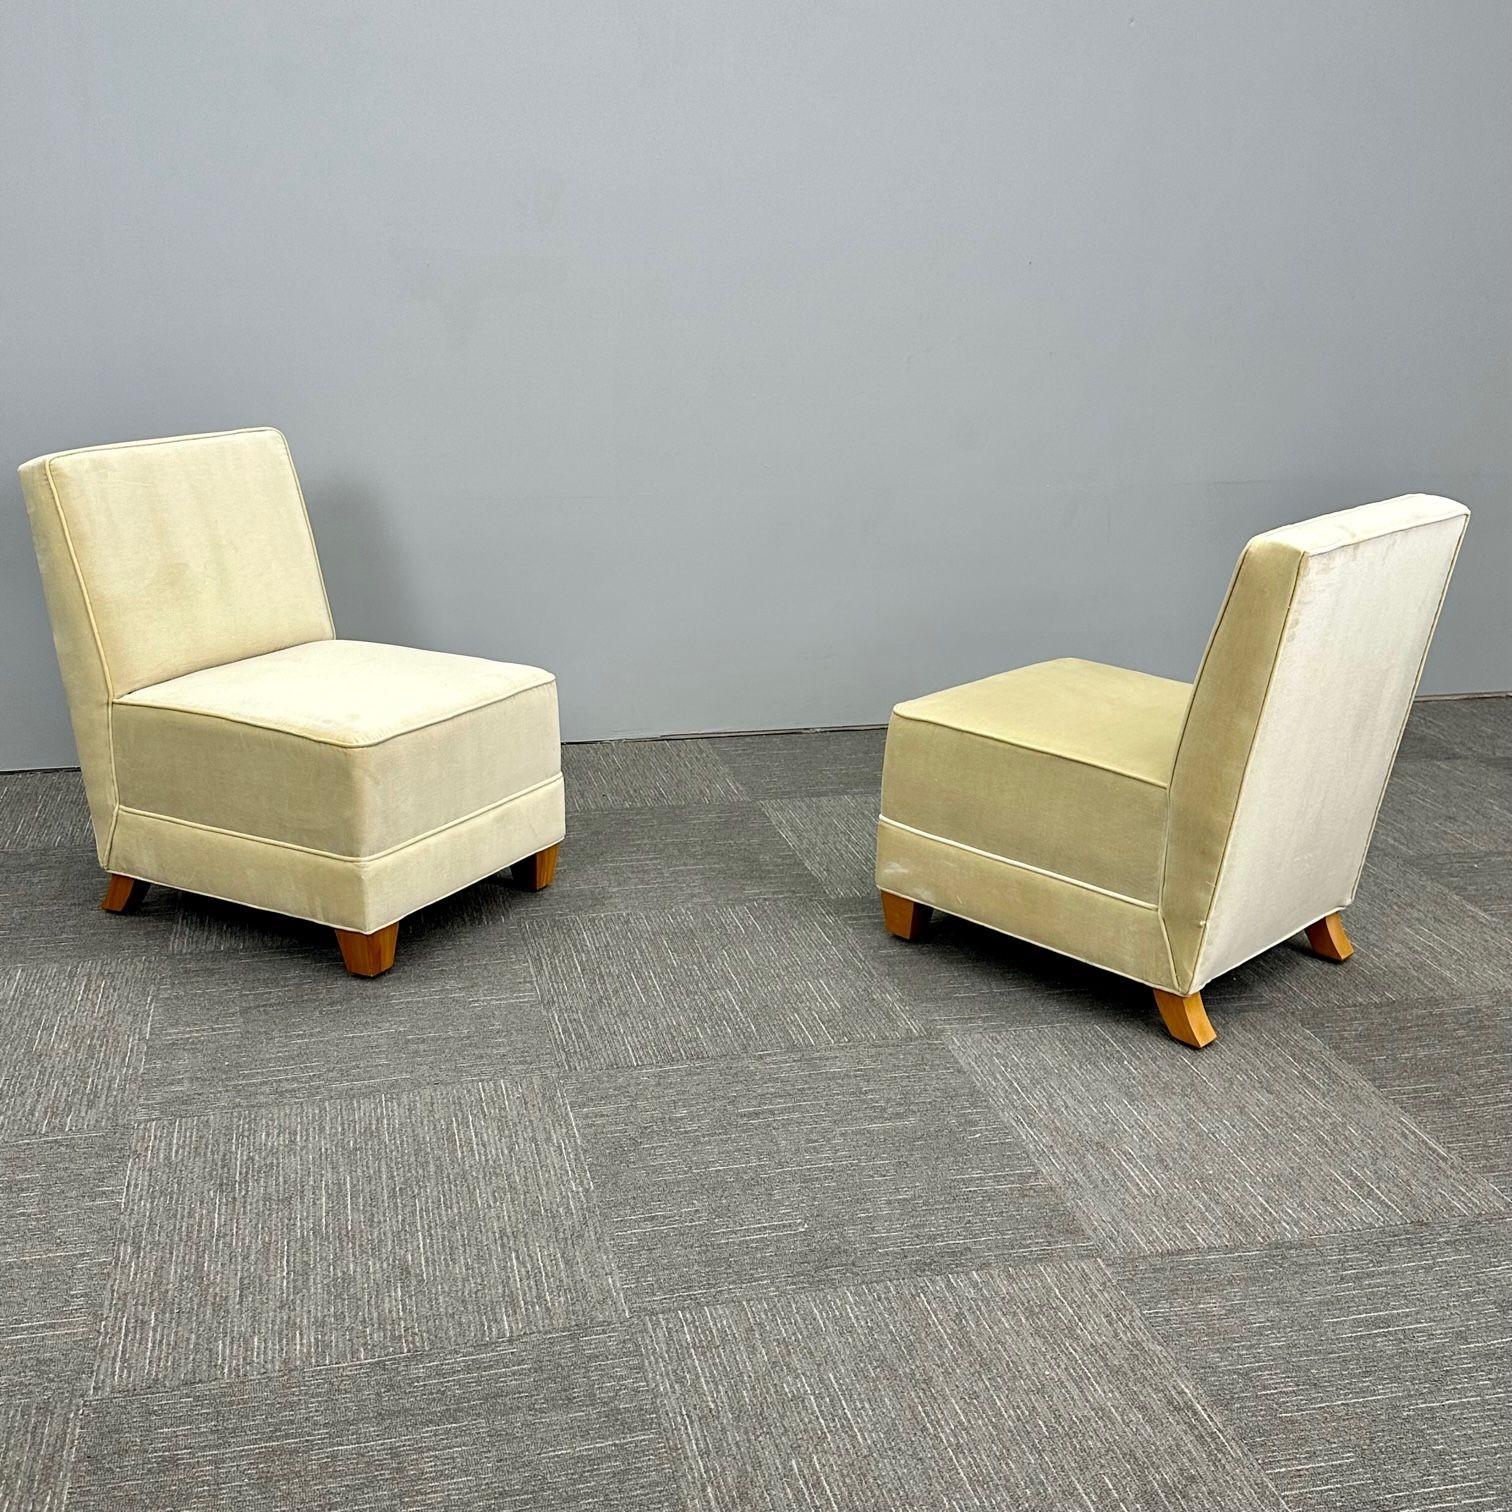 Pair Mid-Century Modern Jean-Michel Frank Style Lounge / Slipper Chairs, Mohair
 
Designed, developed and produced in our gallery's overseas workshops. Available to be custom made to order in a wide variety of different fabrics, sizes, and colors.